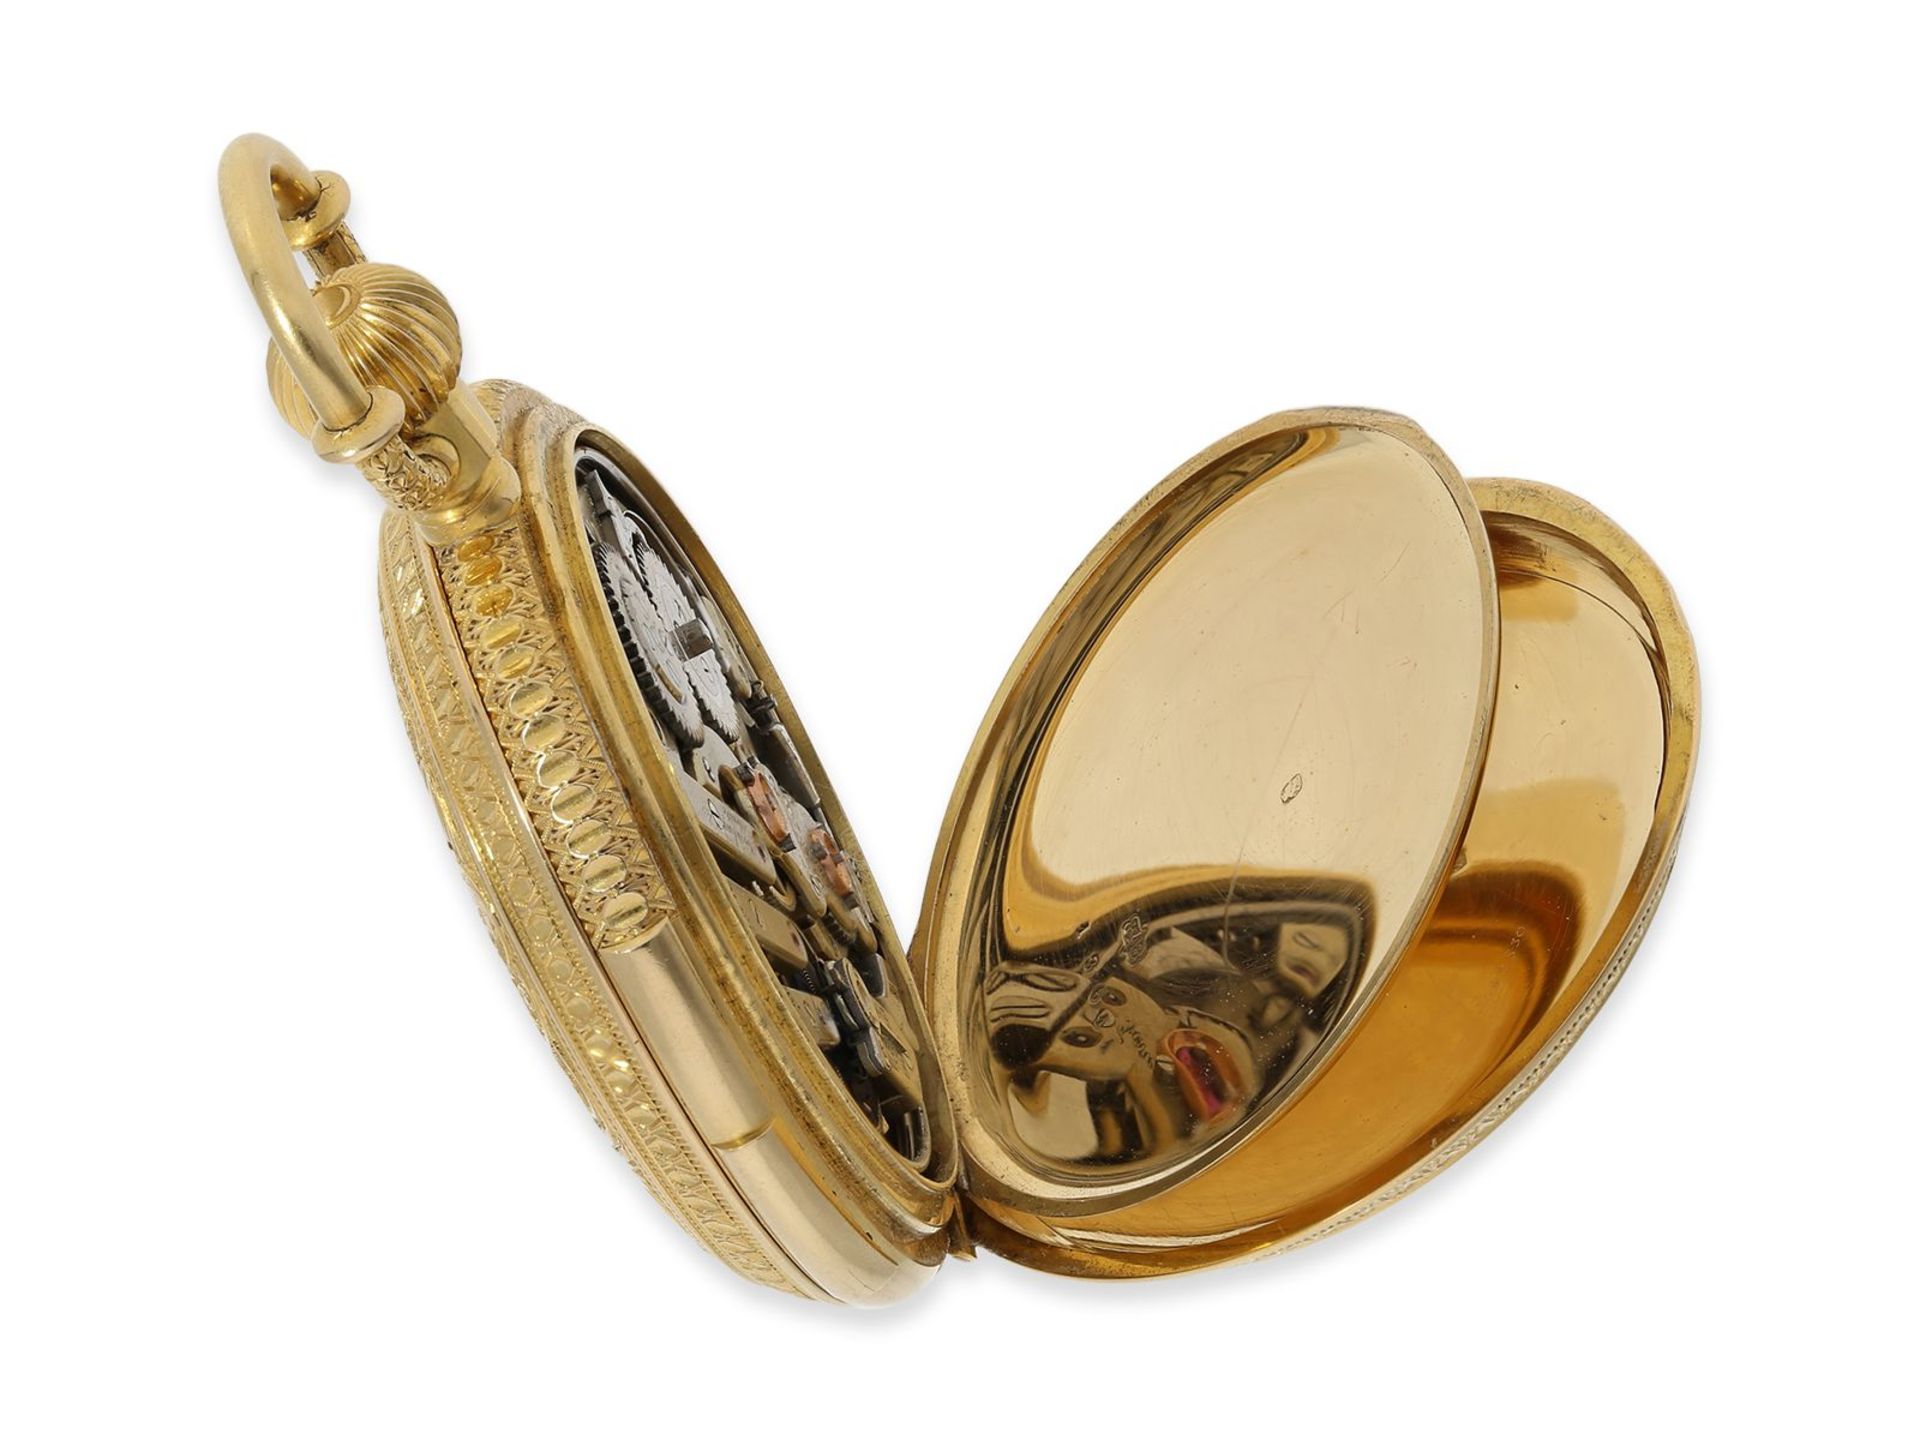 Pocket watch: extremely rare gold/enamel hunting case watch set with pearls and diamonds and figure  - Image 8 of 8